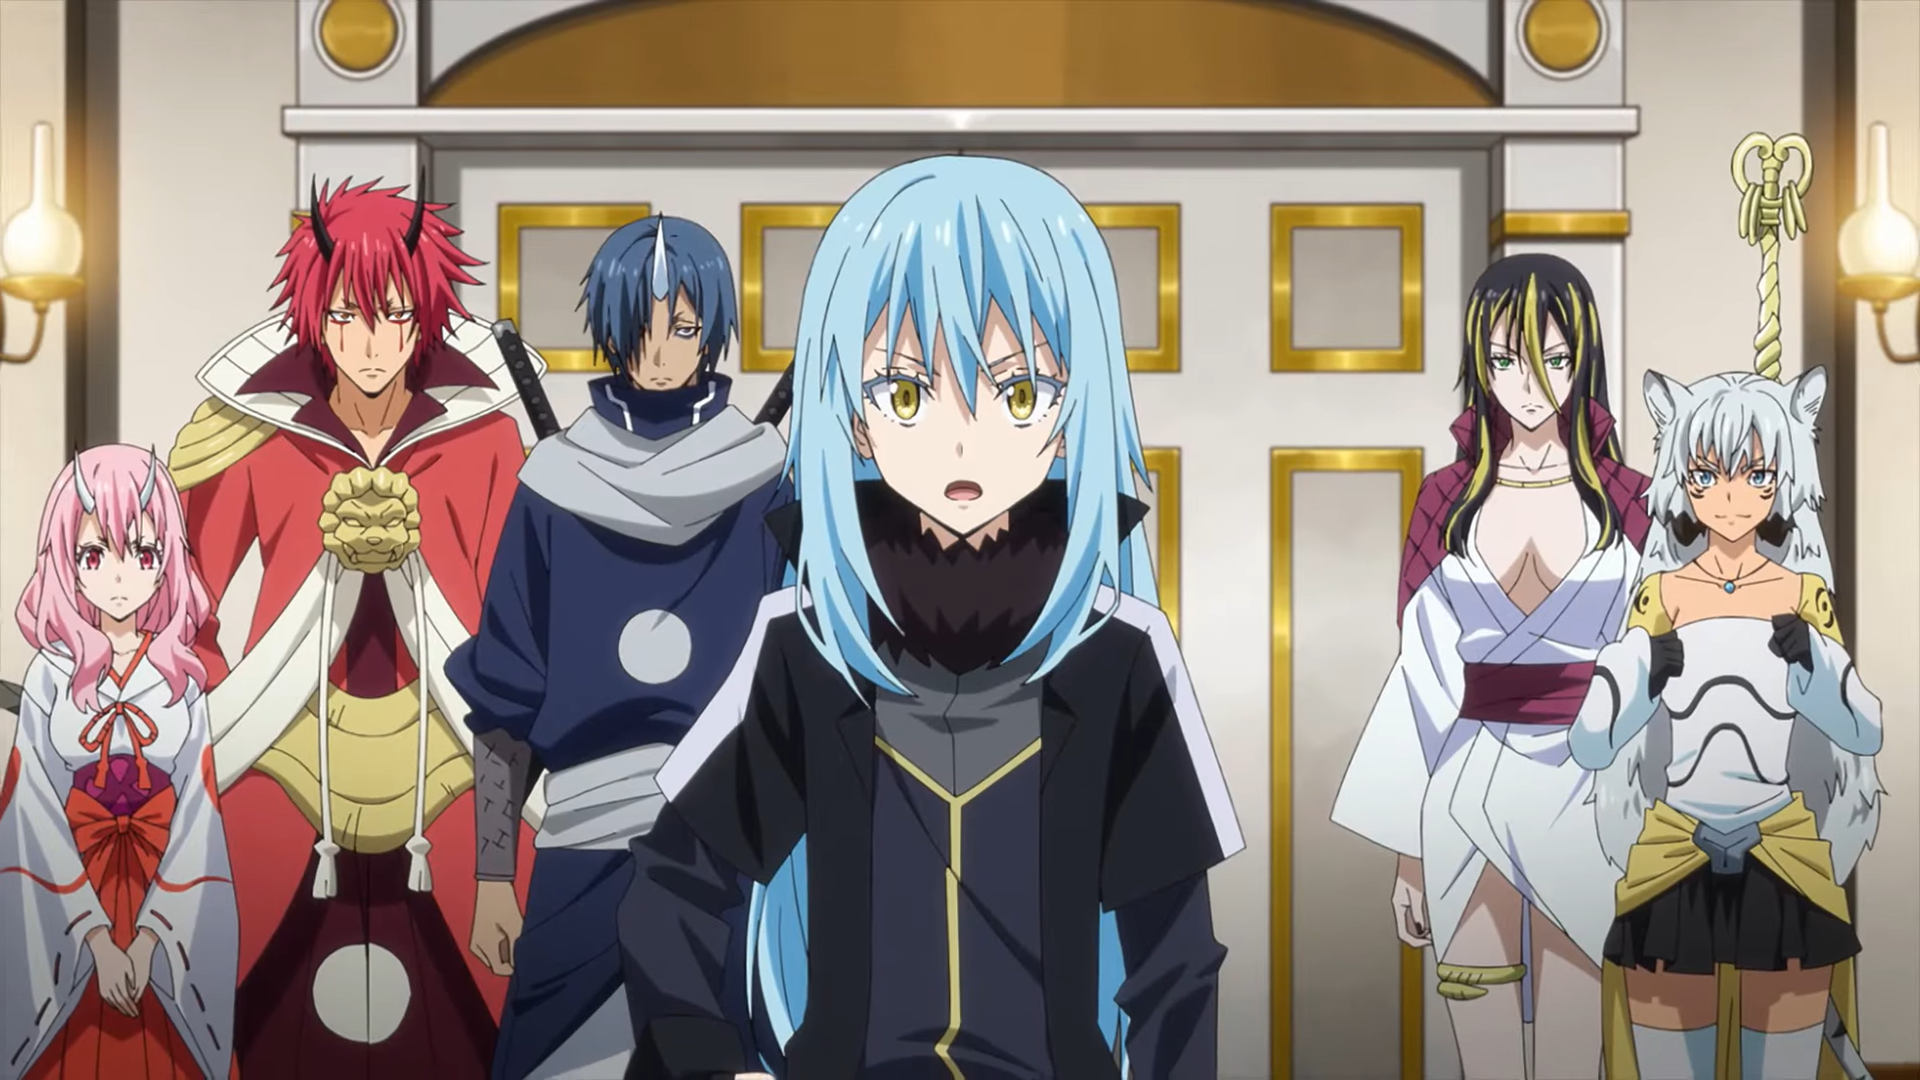 That Time I Got Reincarnated as a Slime Season 3 Anime Drops New PV, Introducing Theme Songs and Cast